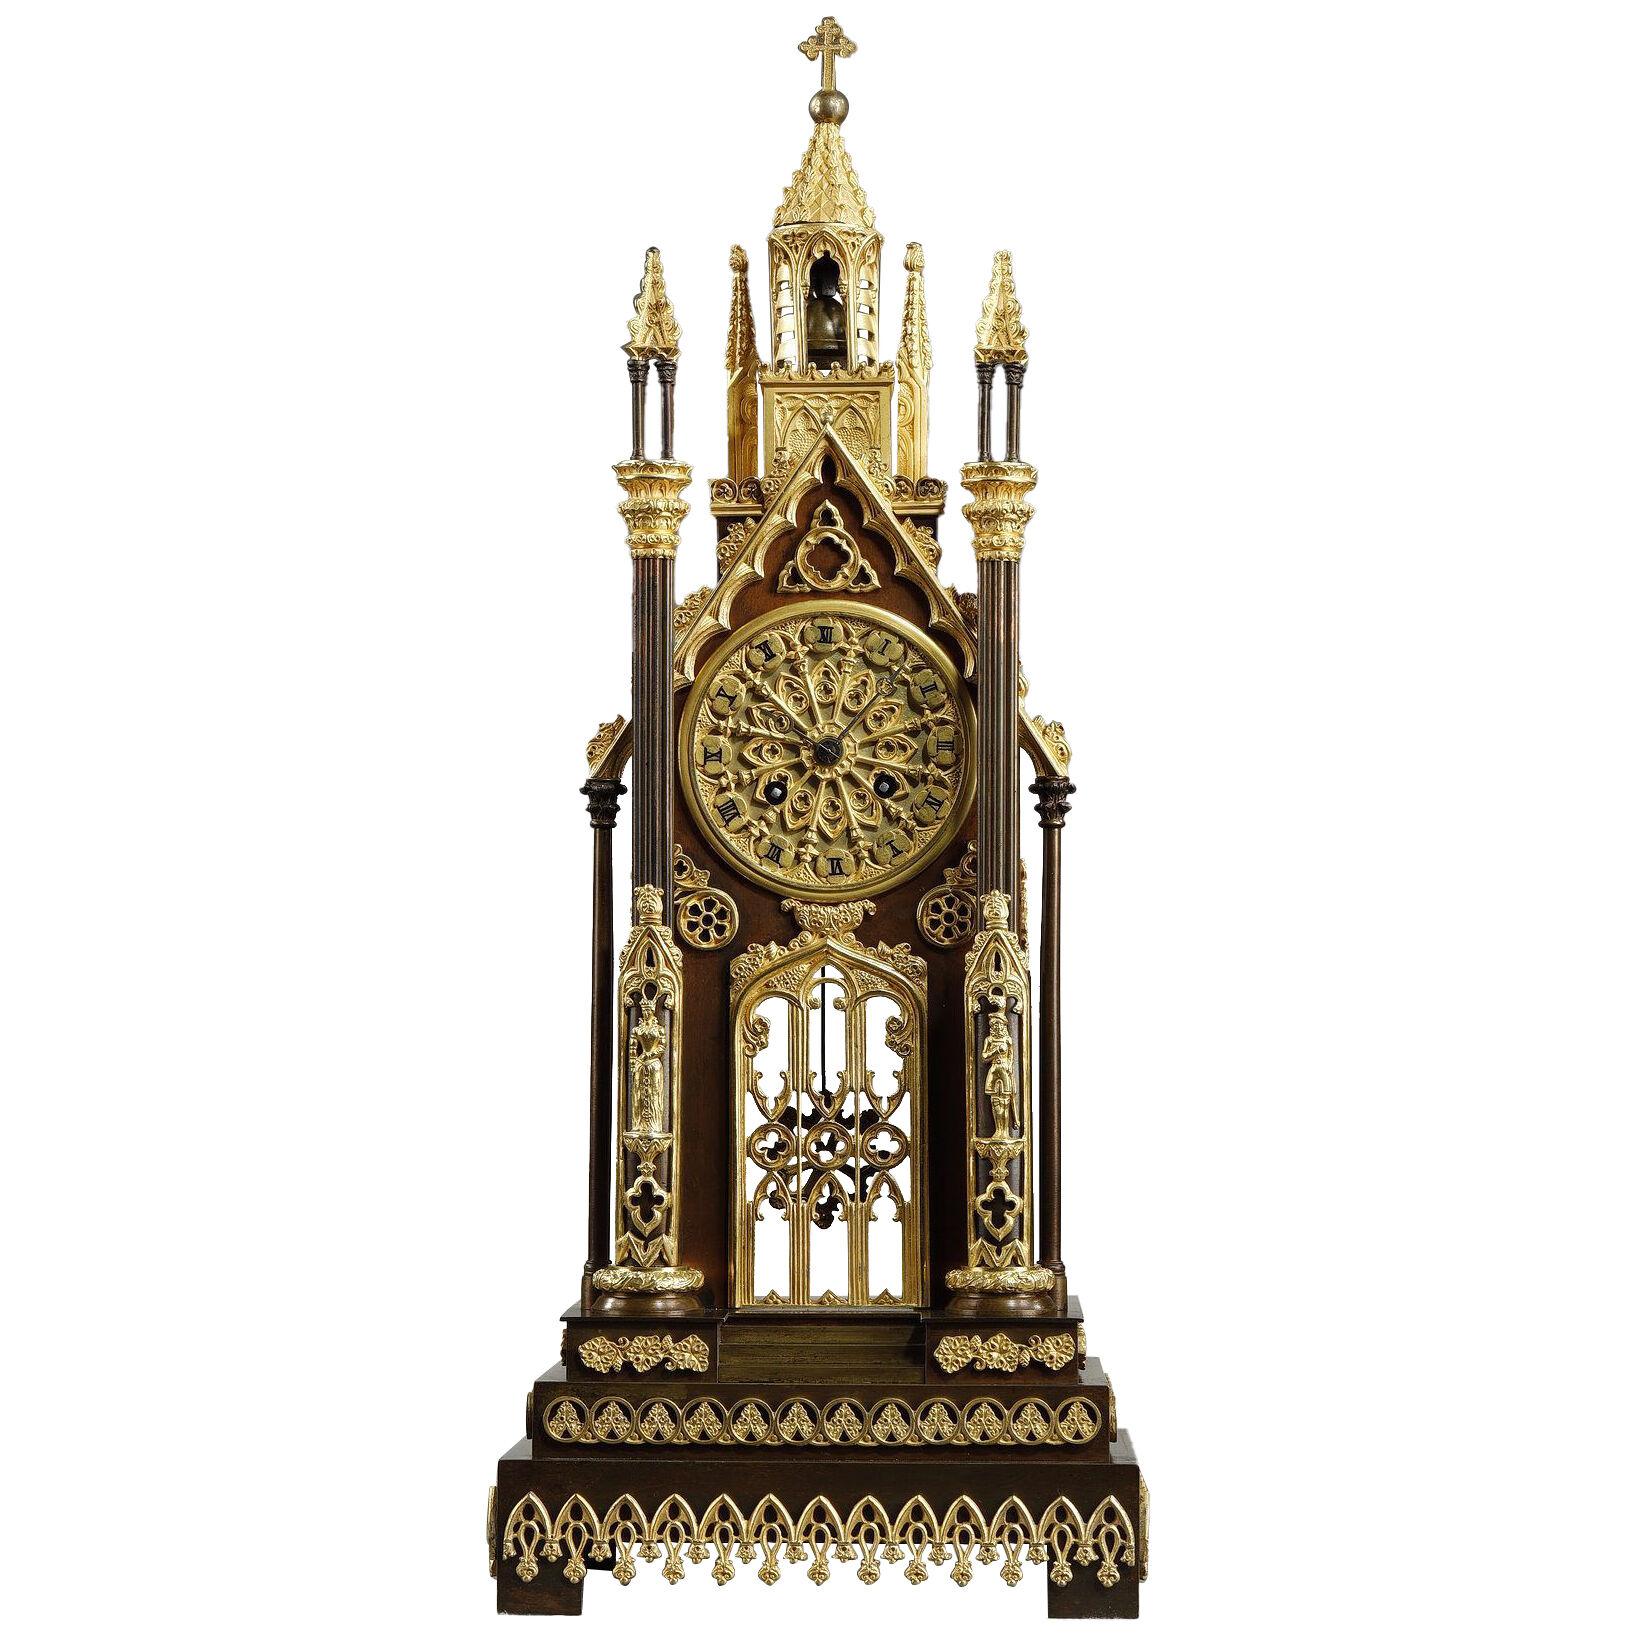 Gilded and patinated bronze cathedral clock from the Charles X period